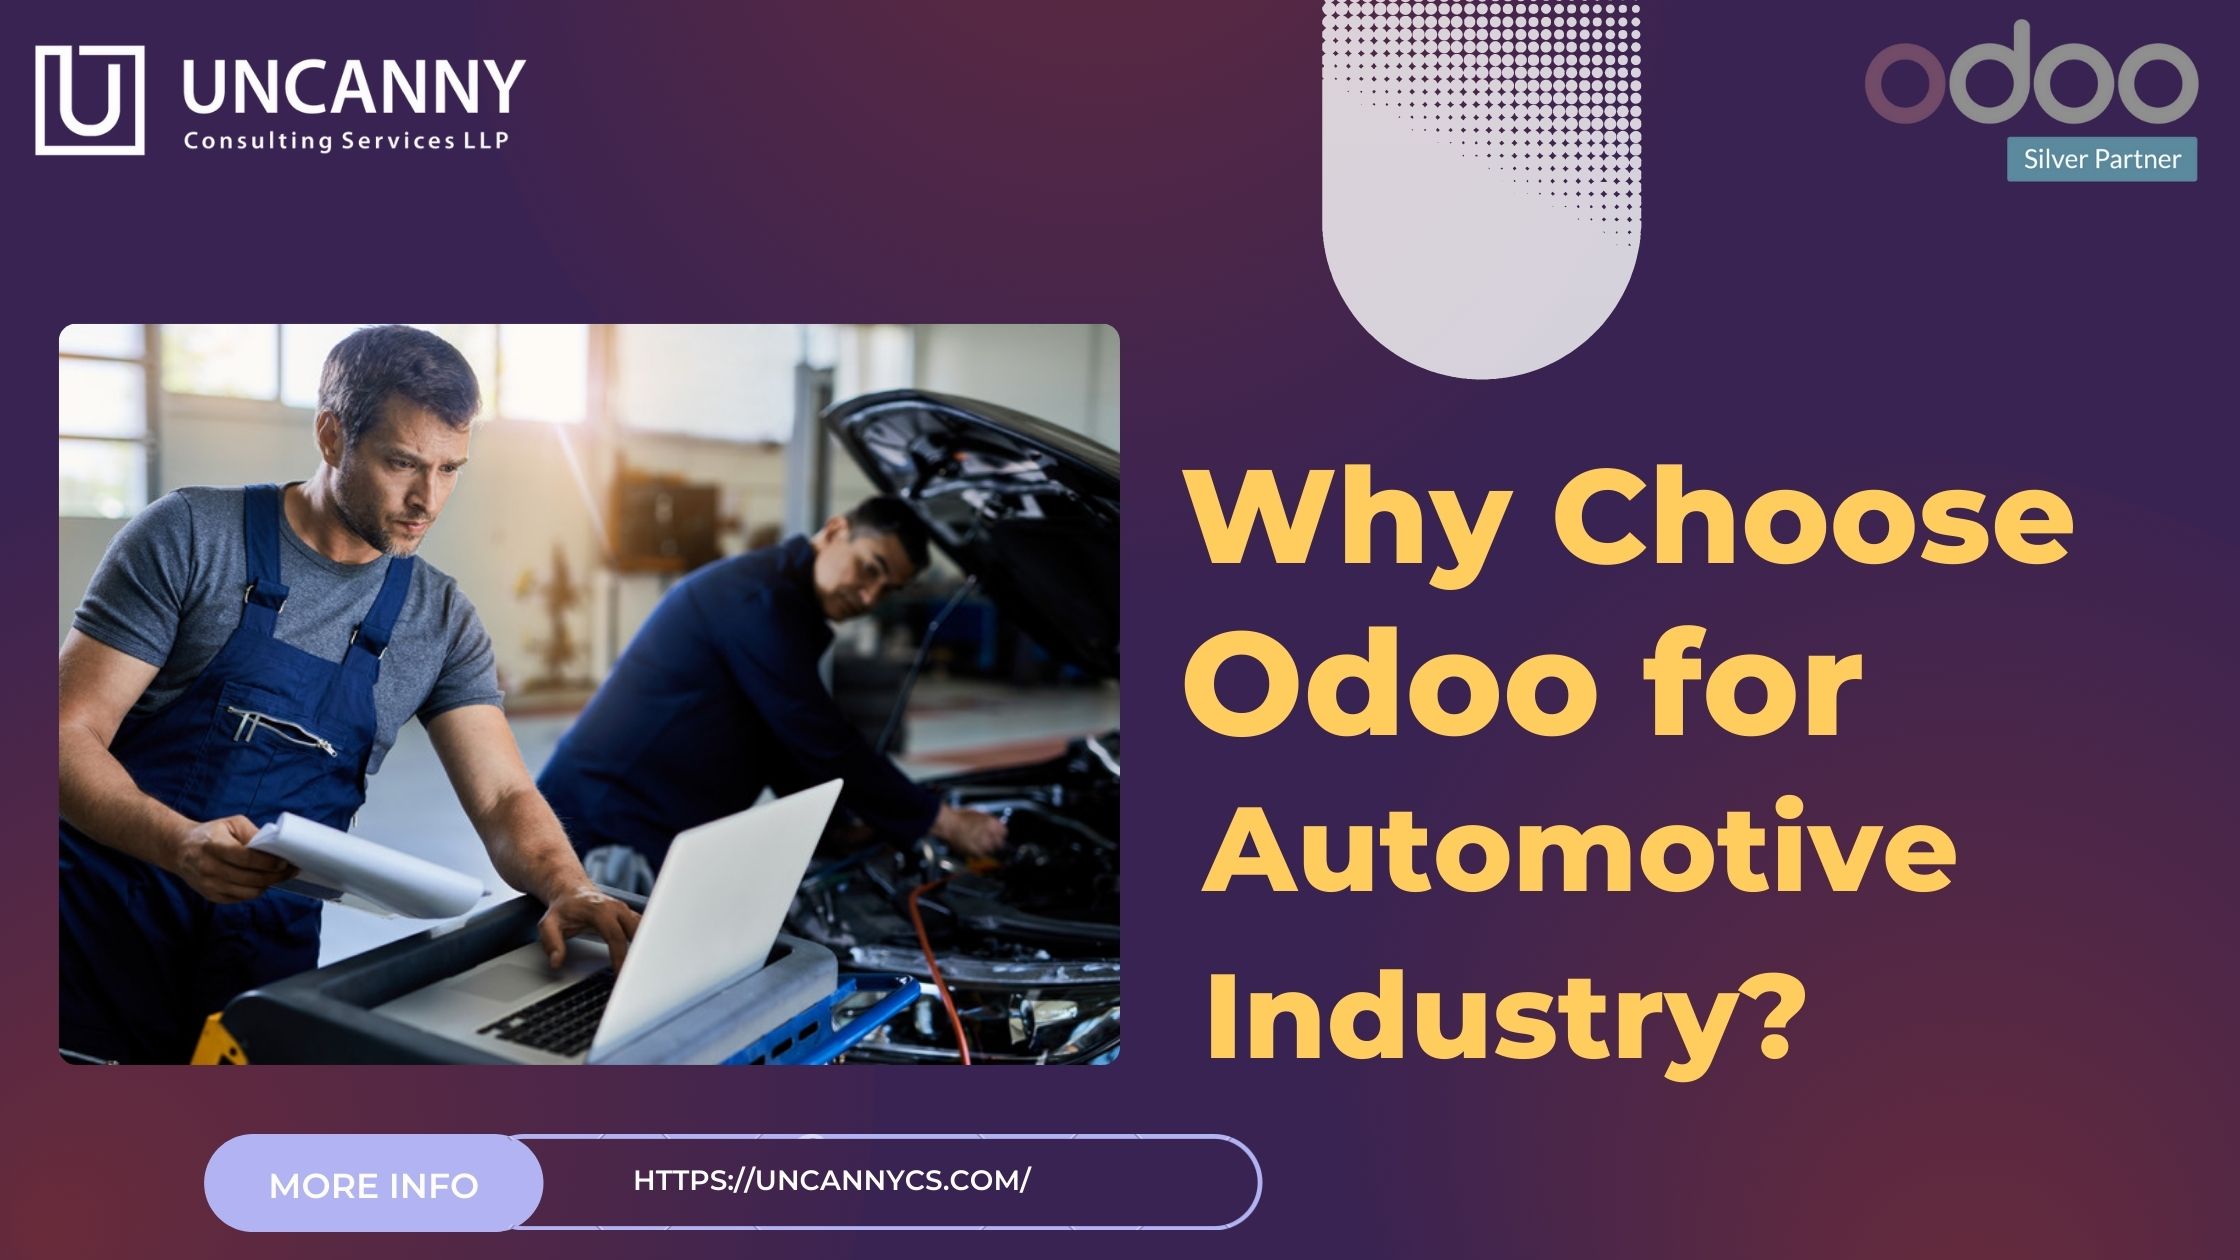 Why Choose Odoo for Automotive Industry?